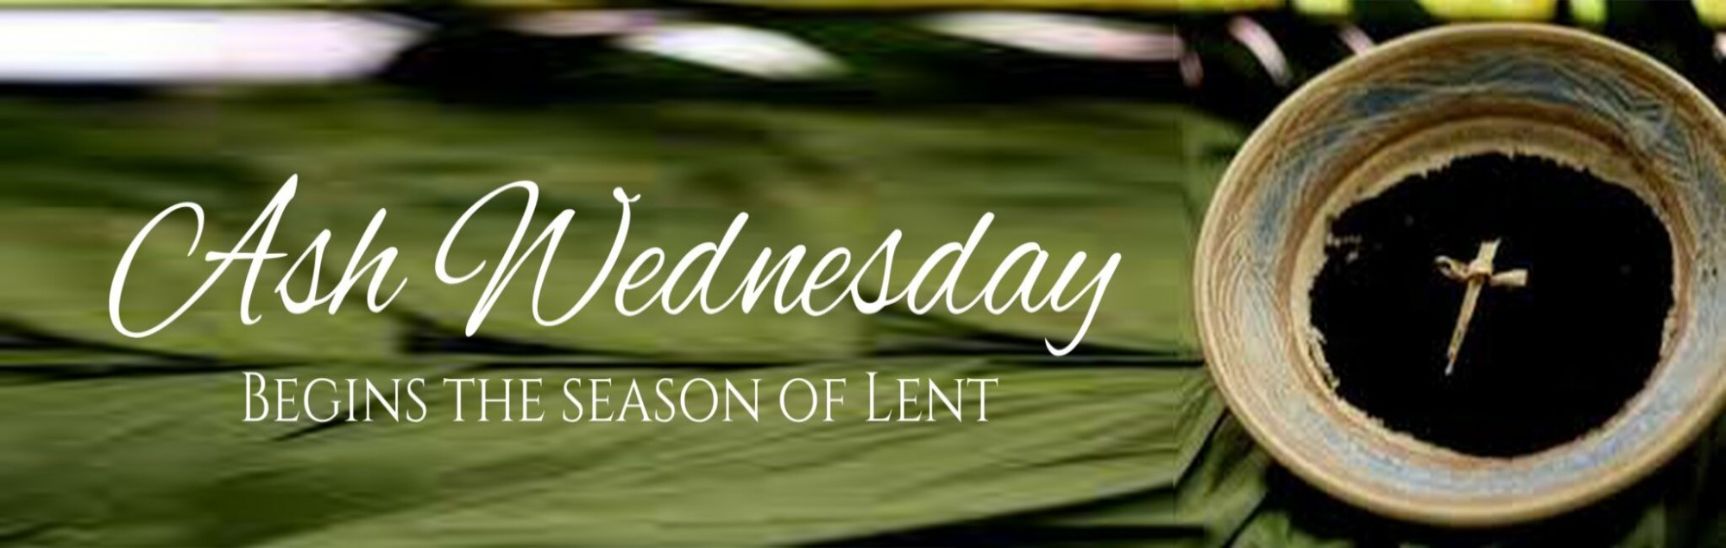 Ash Wednesday Soup Supper & Service   -   Wednesday, February 14 at 5:30pm